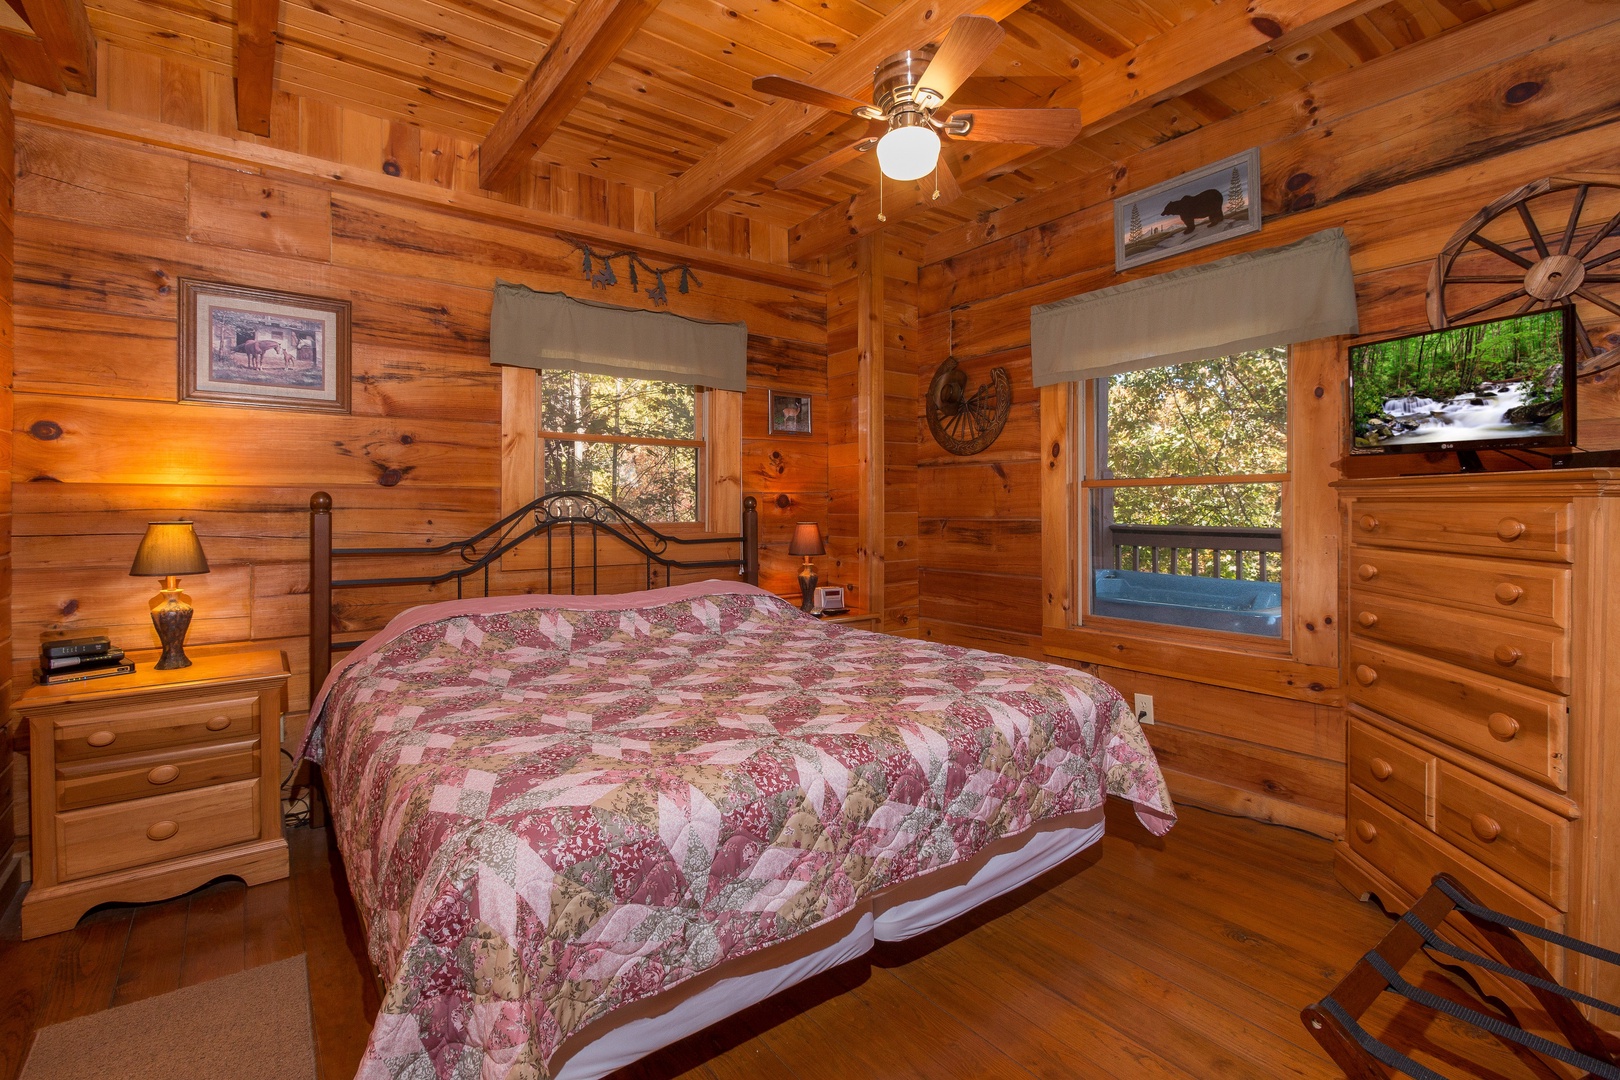 Bedroom with a king bed, night stands, and lamps at Hawk's Nest, a 1 bedroom cabin rental located in Pigeon Forge